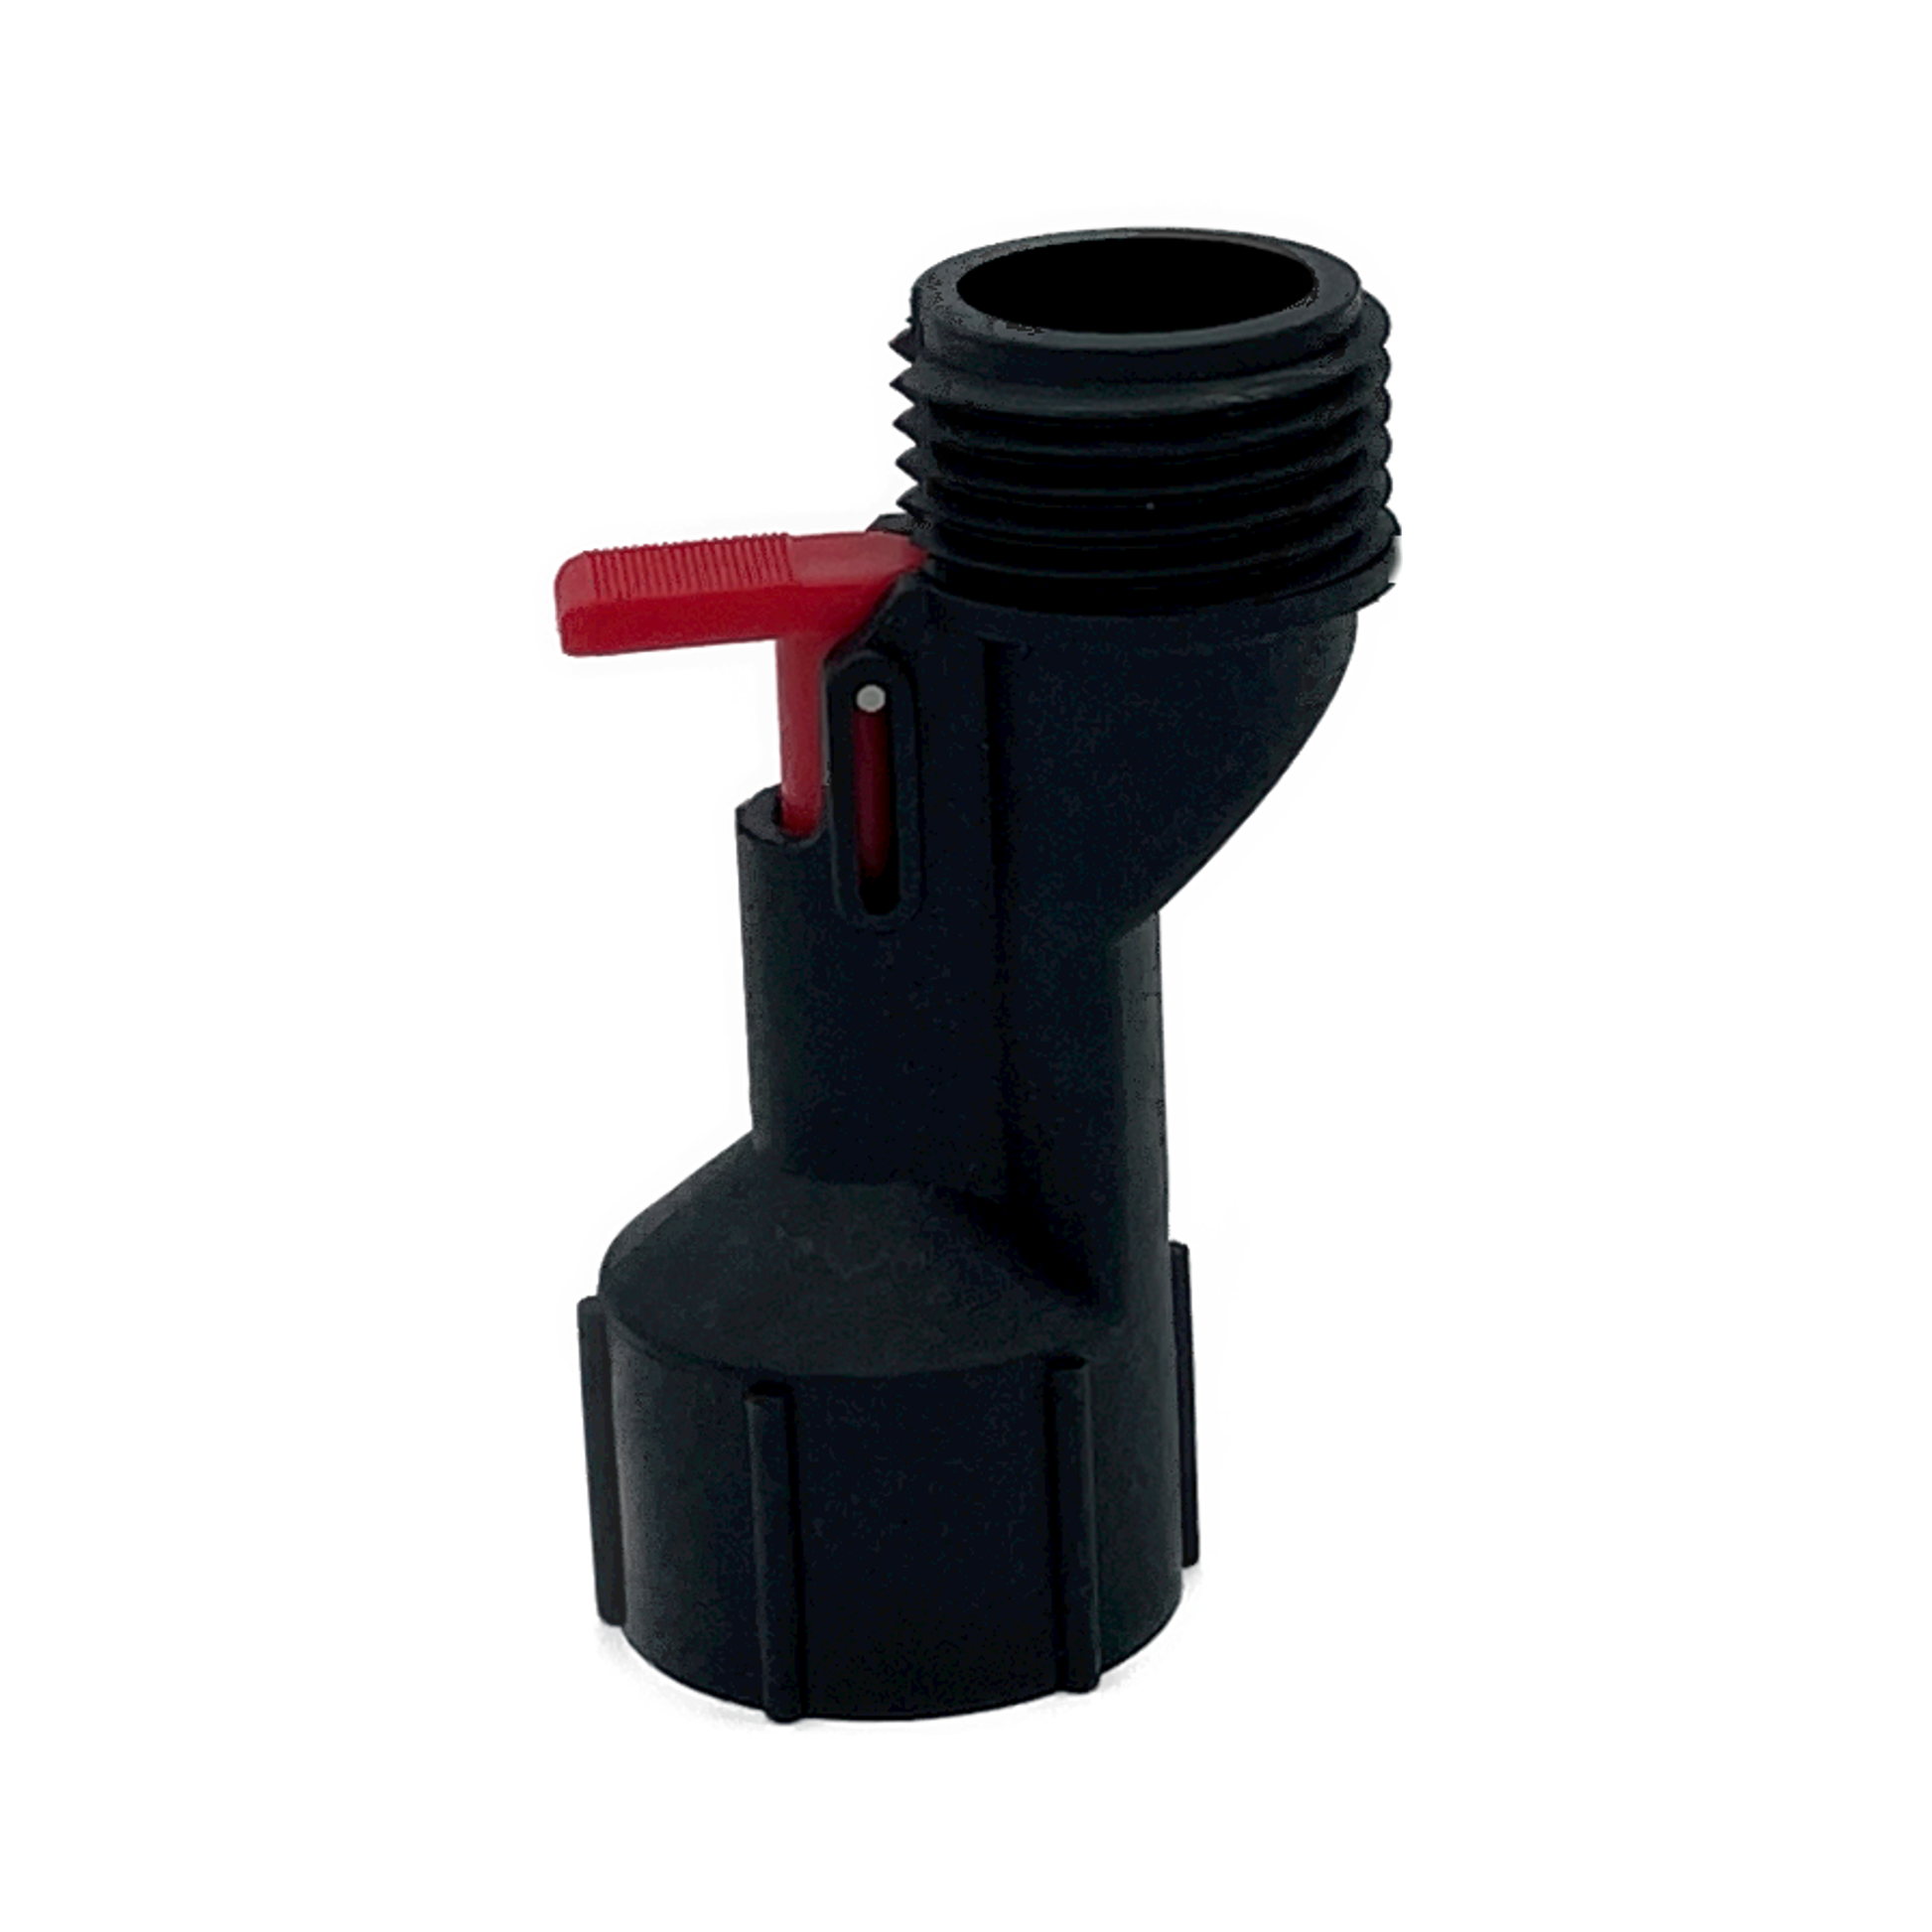 Water Block optional reset tool. Connects directly to the Water Block to resume water flow, in the event of shutoff, to the appliance or application. Purely for convenience. Not necessary to restart water flow. 